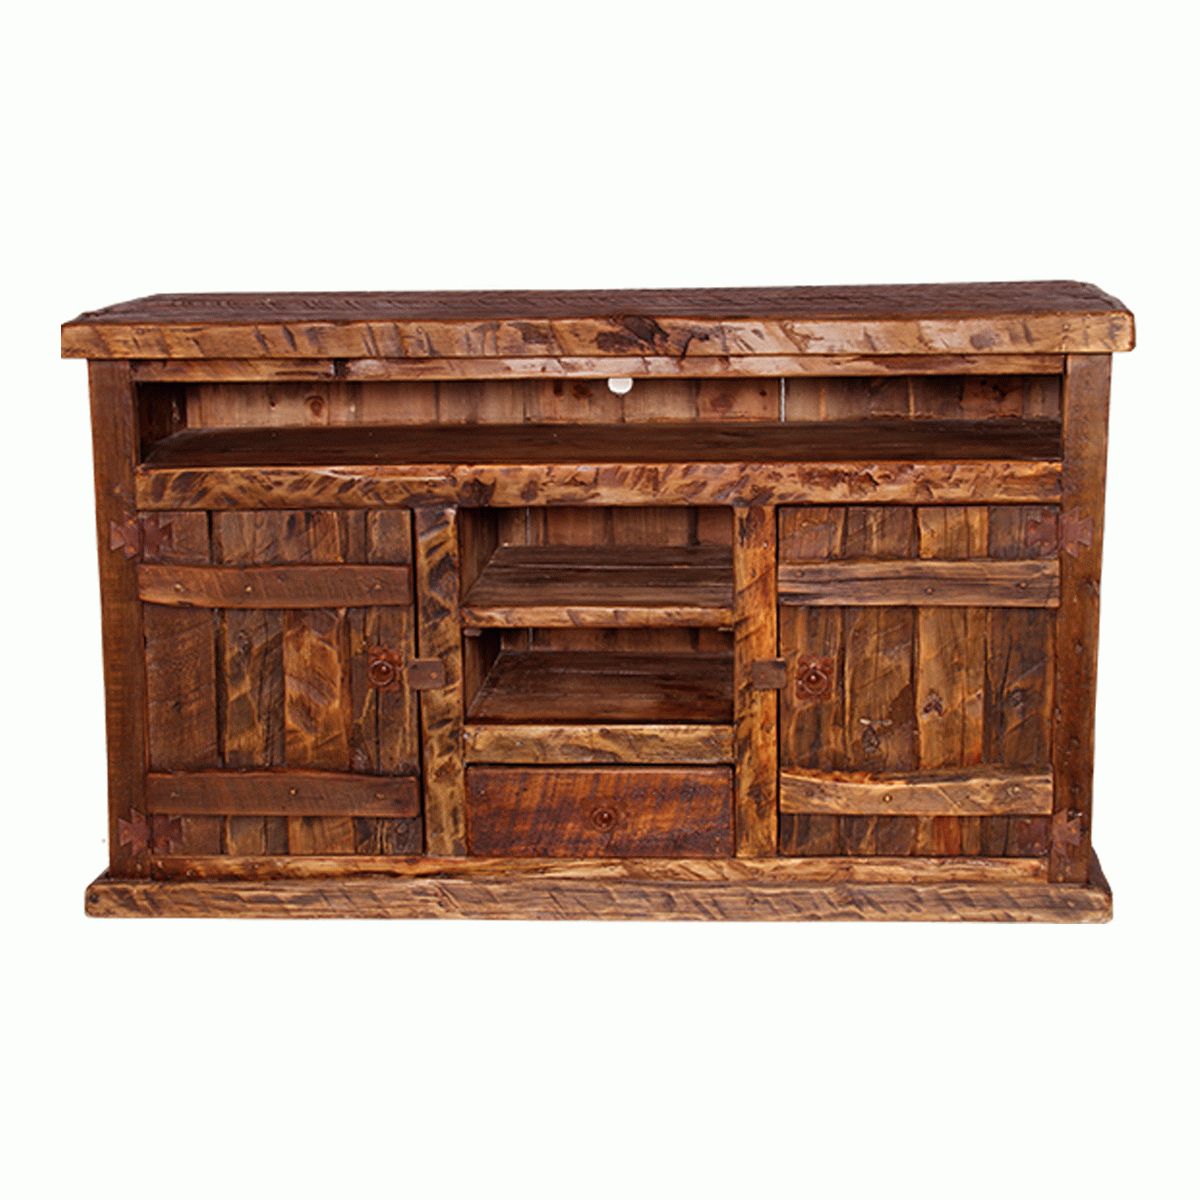 Orange Tv Stands Intended For Most Popular Rustic Tv Stands: Old West Pine Tv Stand (View 19 of 20)